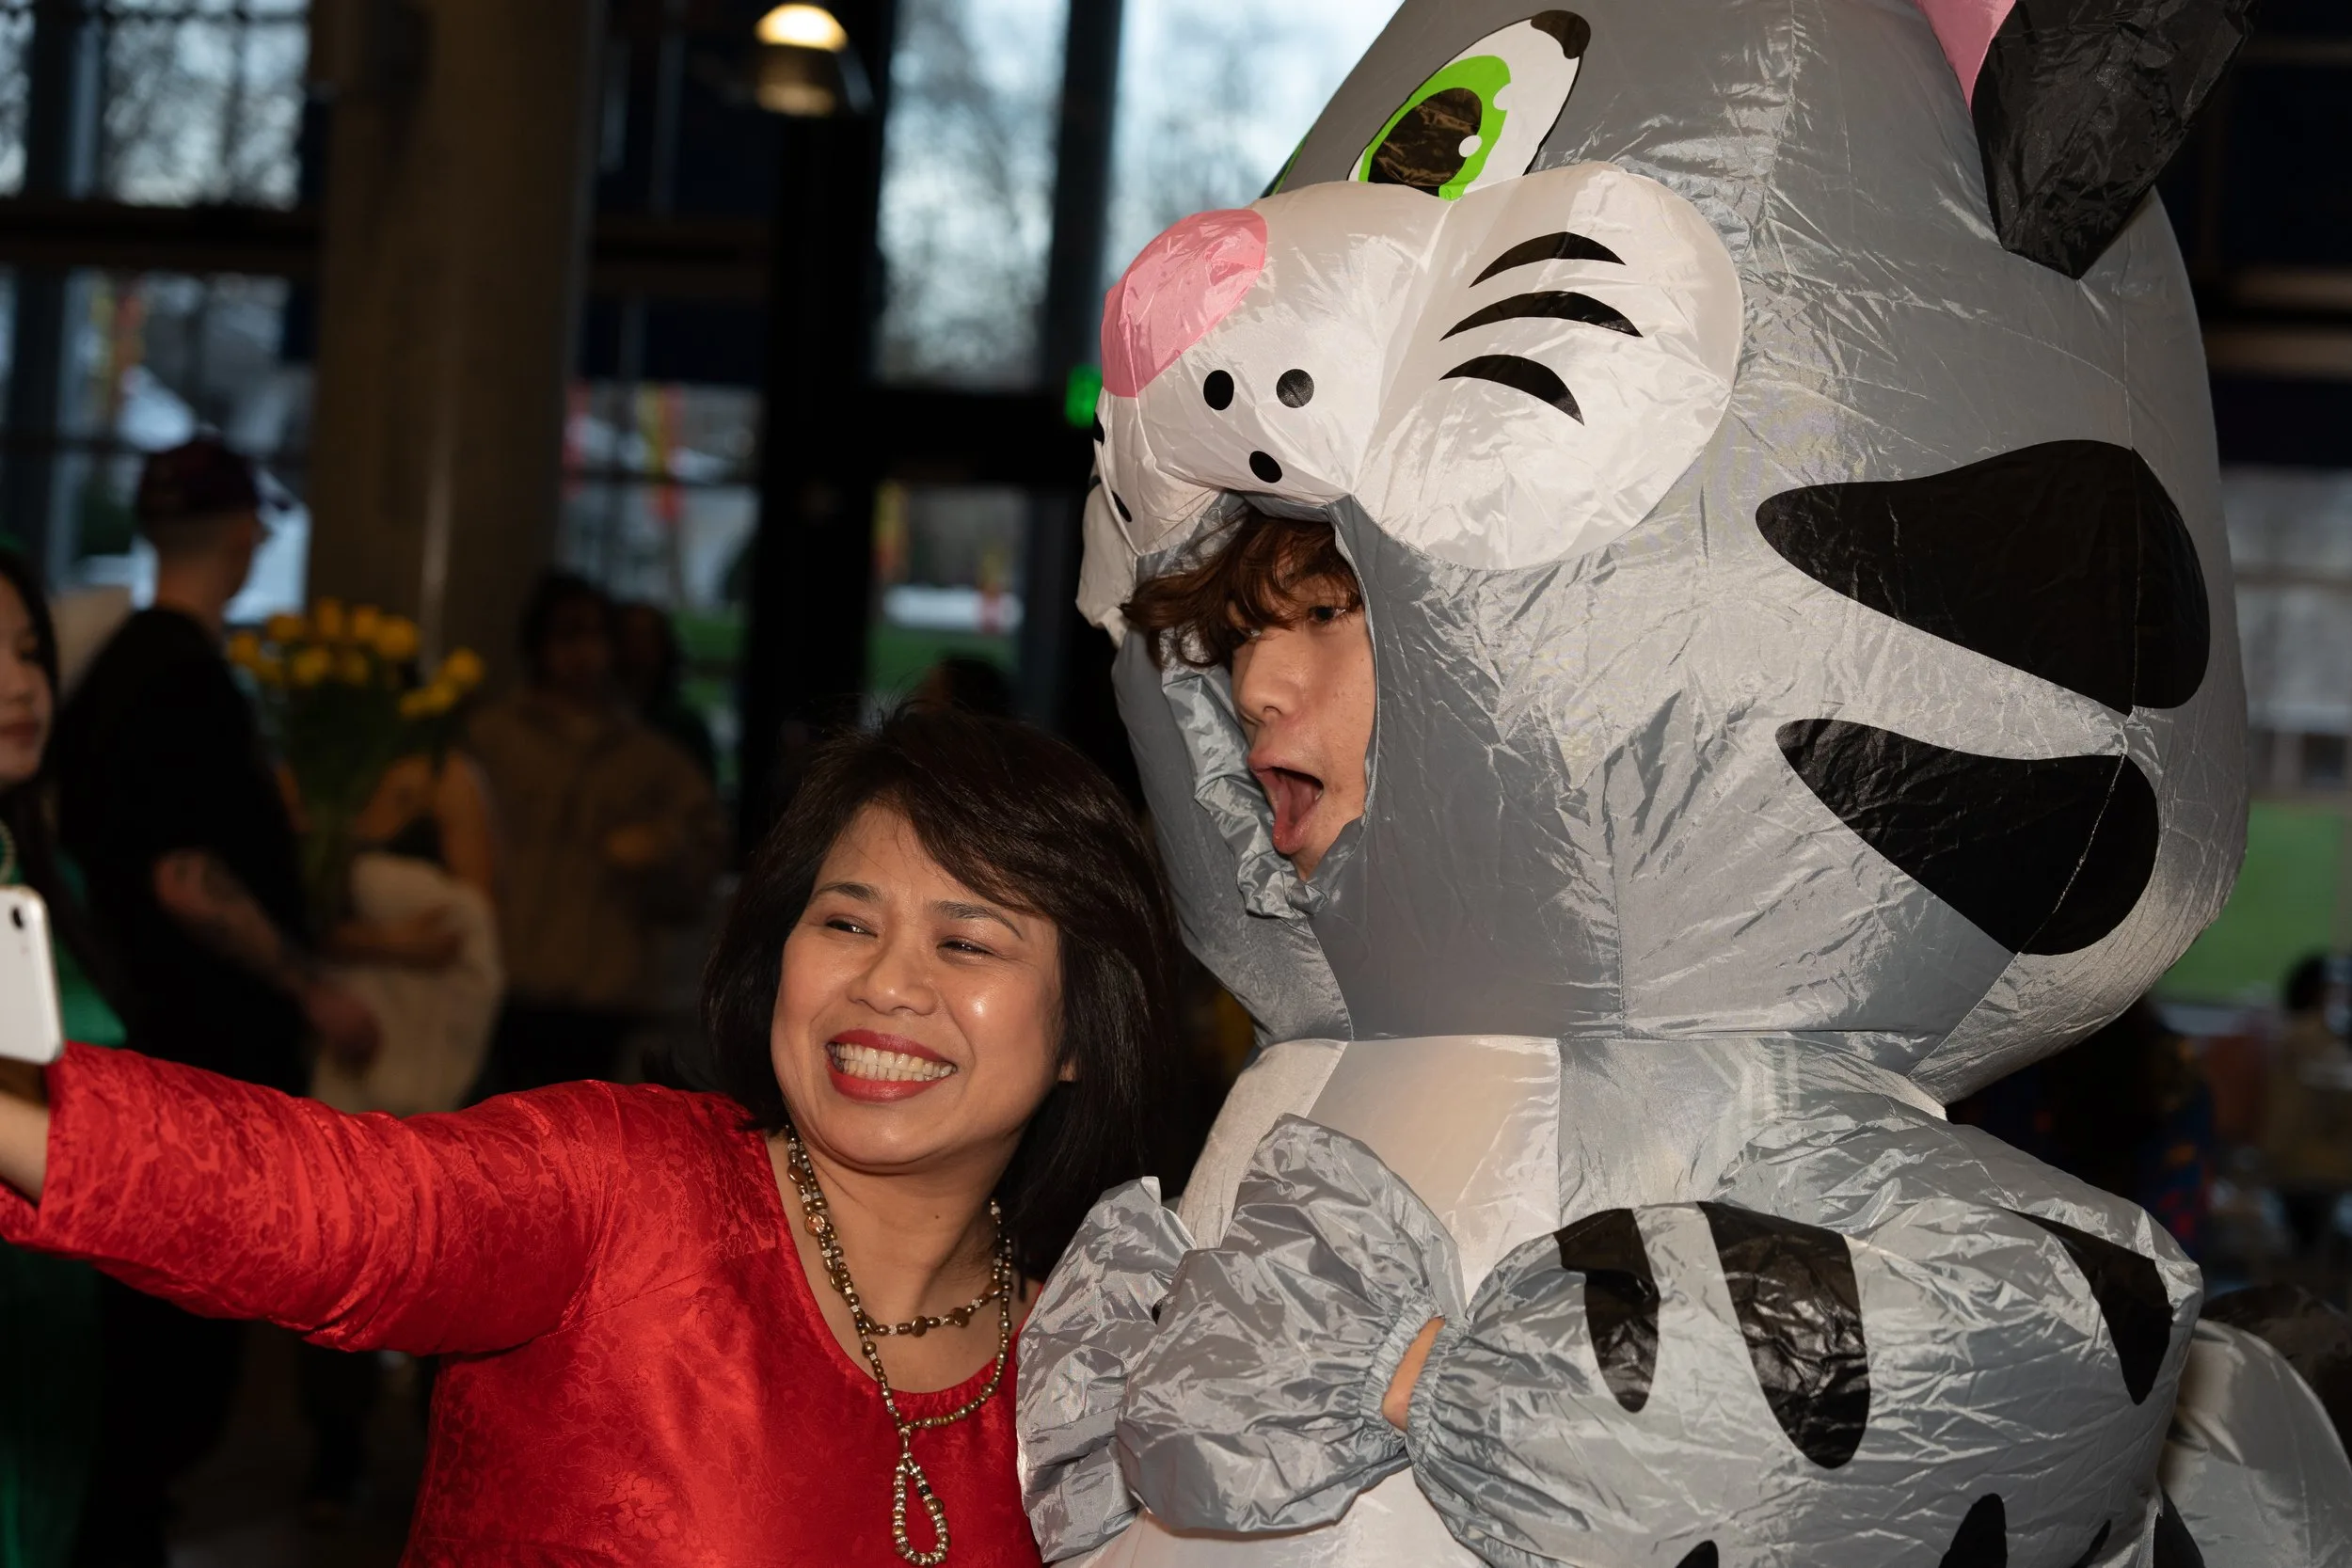 A person takes a photo with another person in an inflatable cat outfit during Year of the Cat 2023.